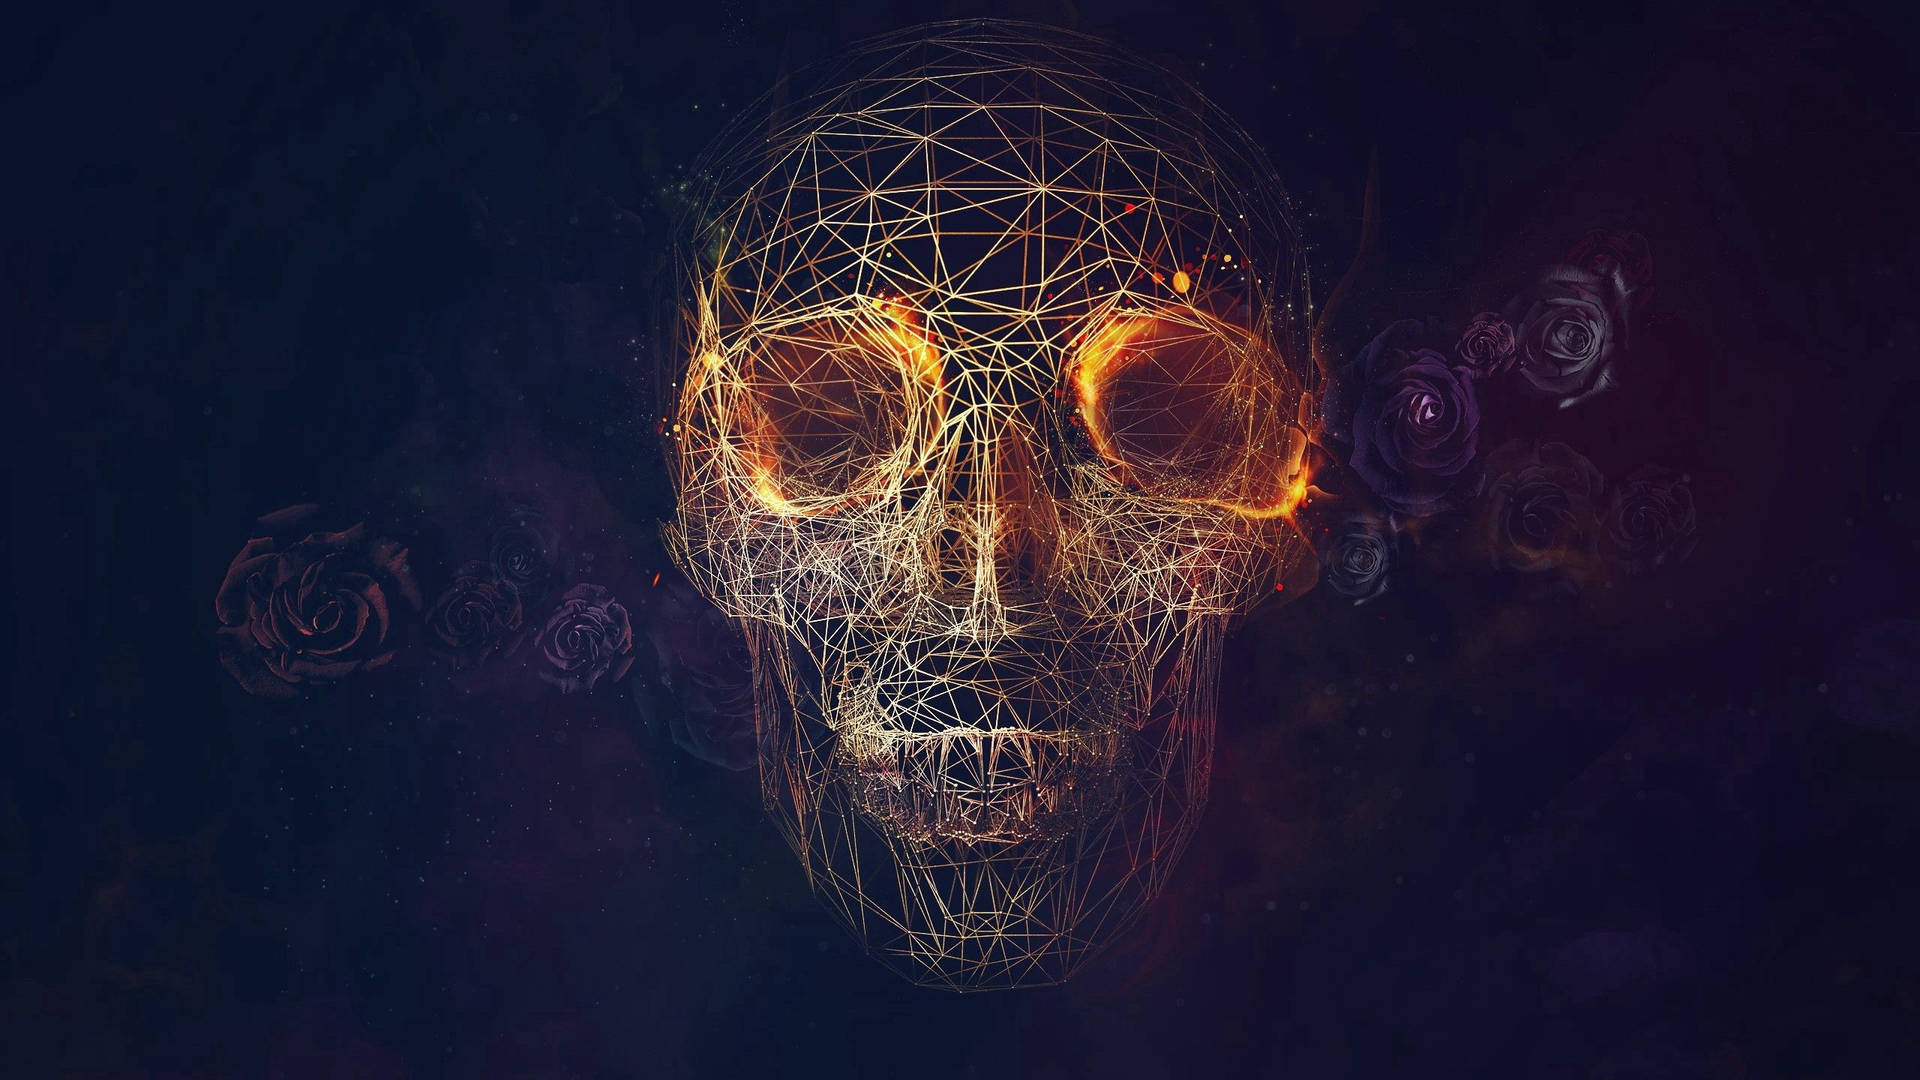 "Geometric Skull Illuminated in a Playful Spectrum of Color" Wallpaper